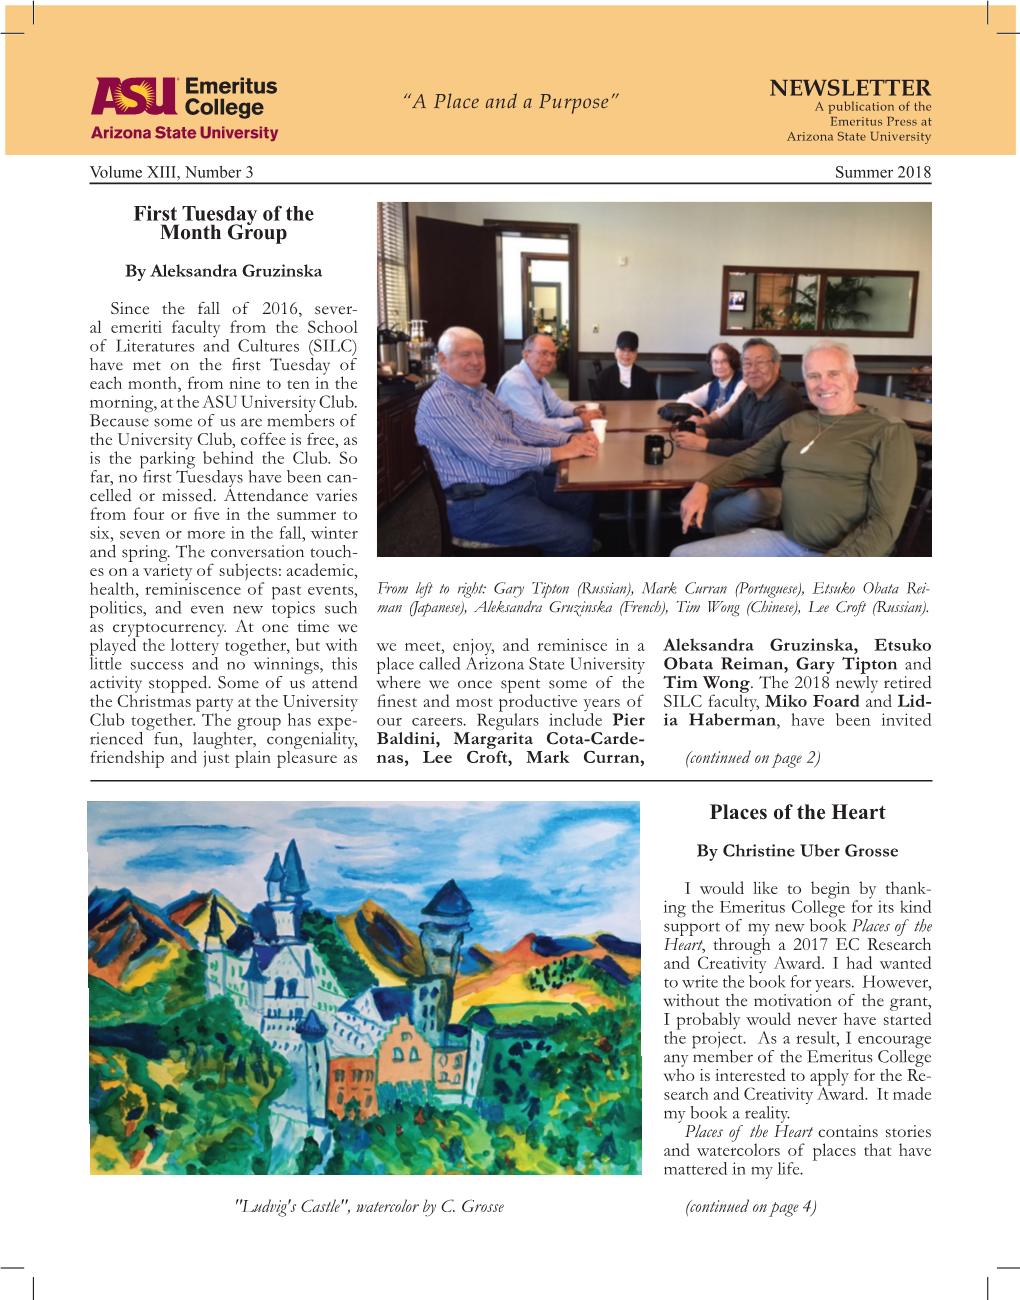 NEWSLETTER “A Place and a Purpose” a Publication of the Emeritus Press at Arizona State University